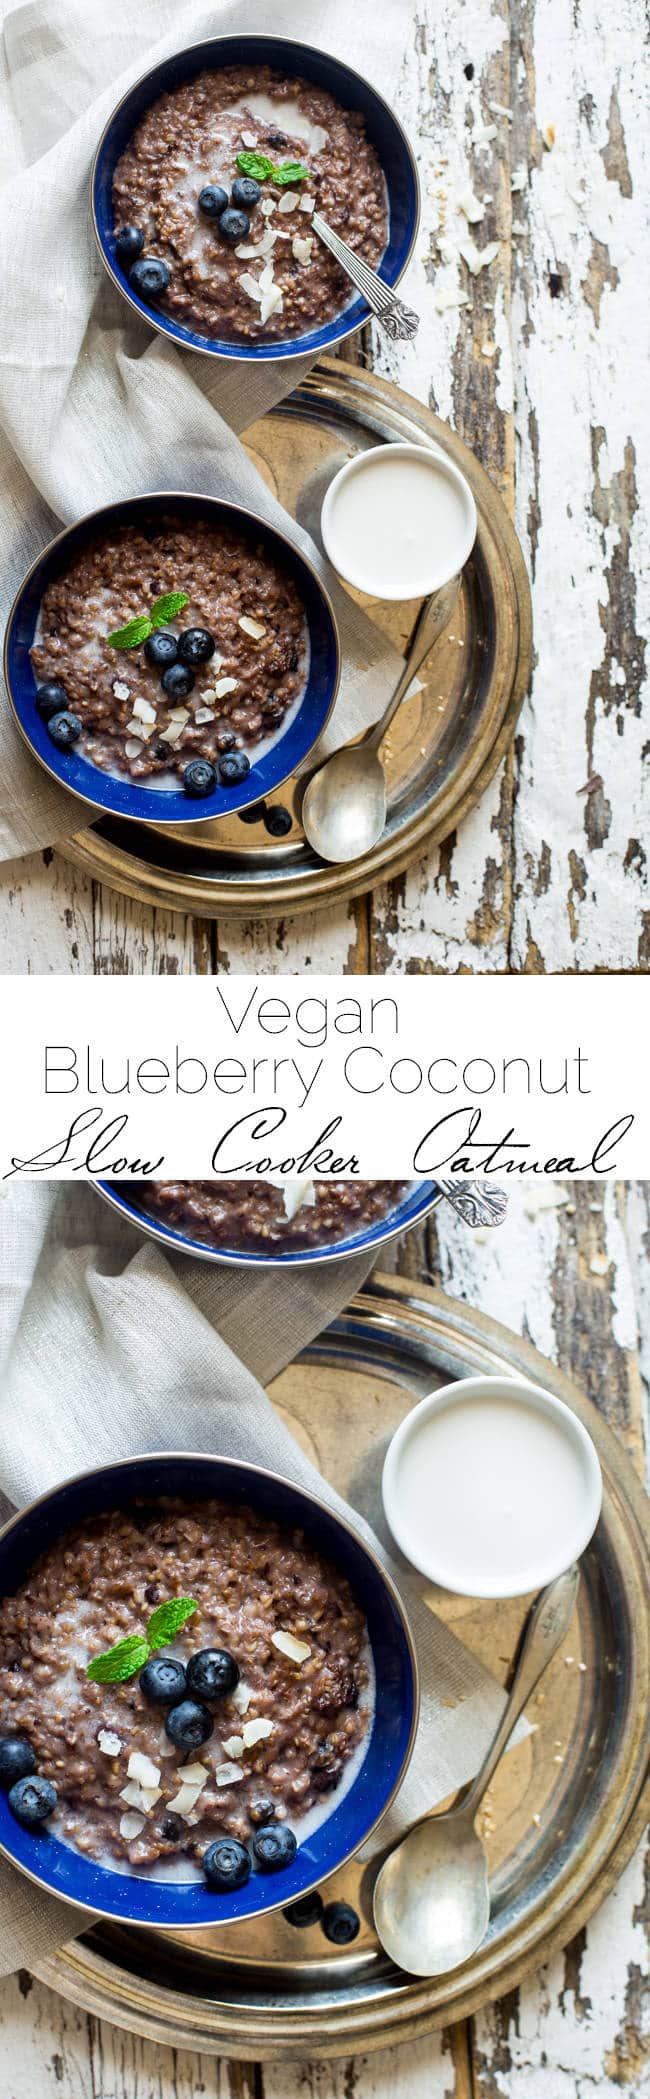 Vegan Coconut Blueberry Slow Cooker Oatmeal - Let the slow cooker do the work for you with this easy, healthy and sugar/gluten/dairy free oatmeal that is creamy and sweet! Perfect to make ahead for busy mornings! | Foodfaithfitness.com | @FoodFaithFit